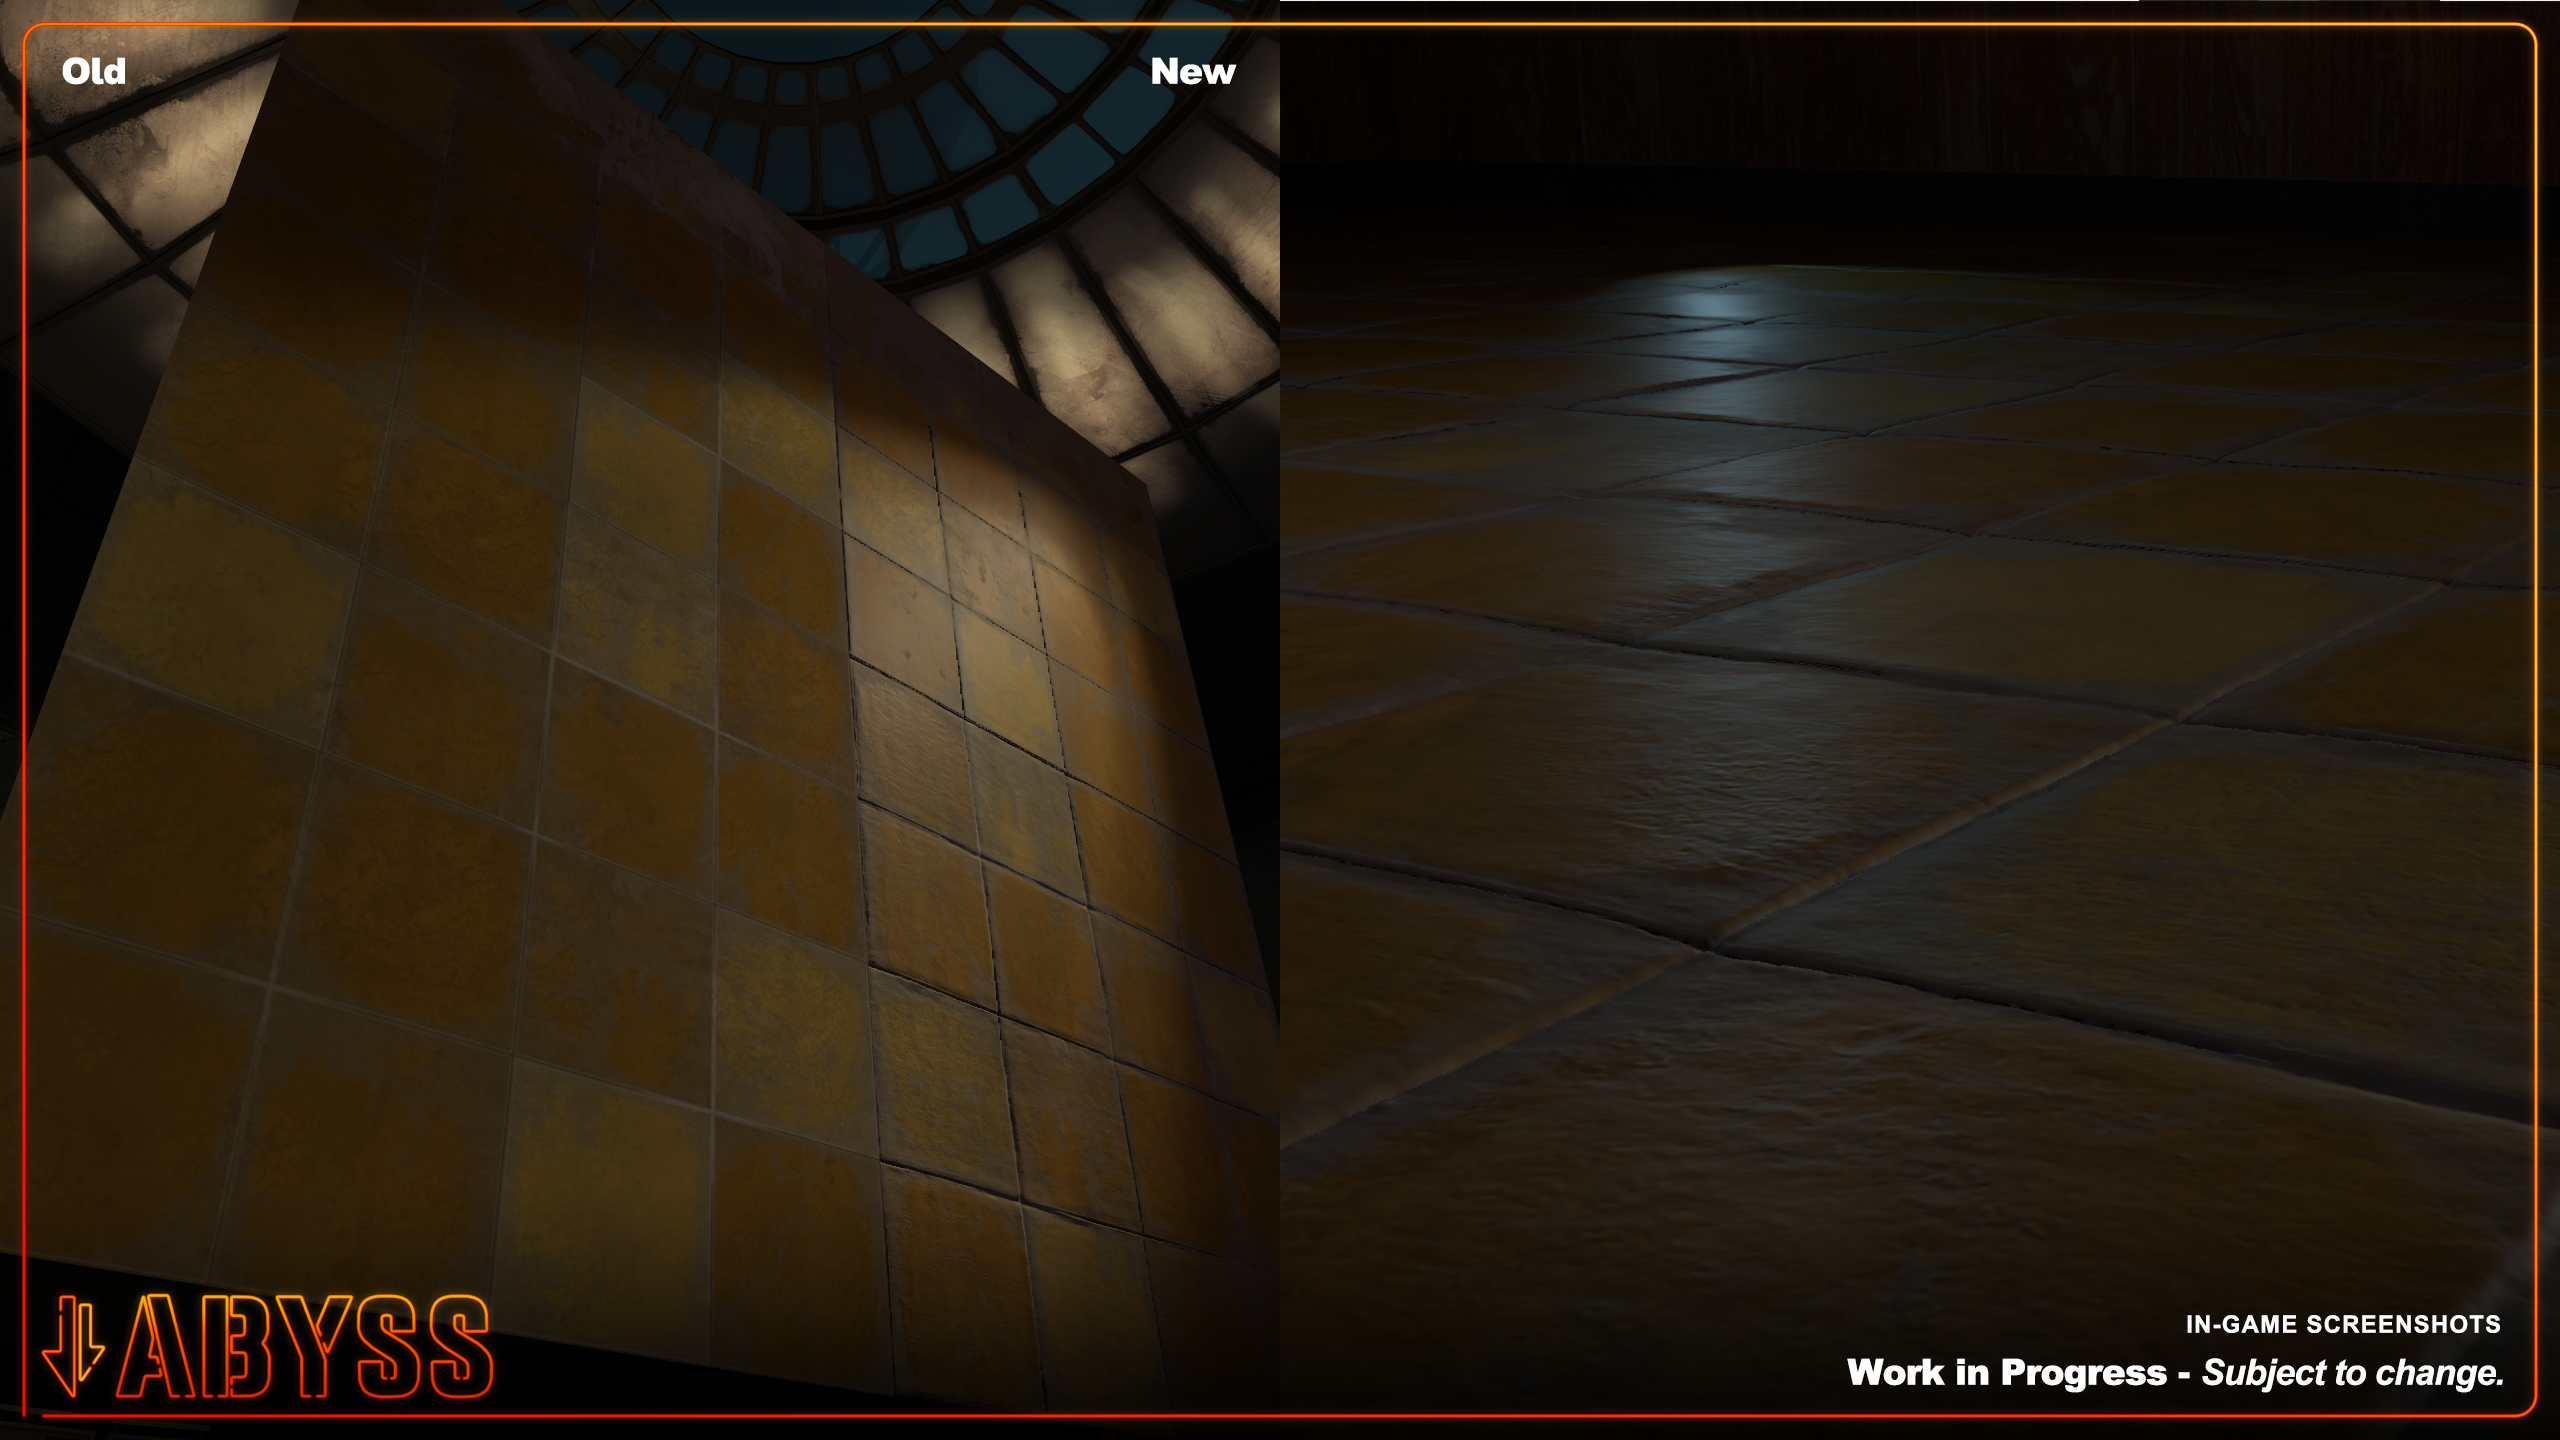 A comparison between the 1970s floor tile texture from Portal 2 and the Abyss remaster.